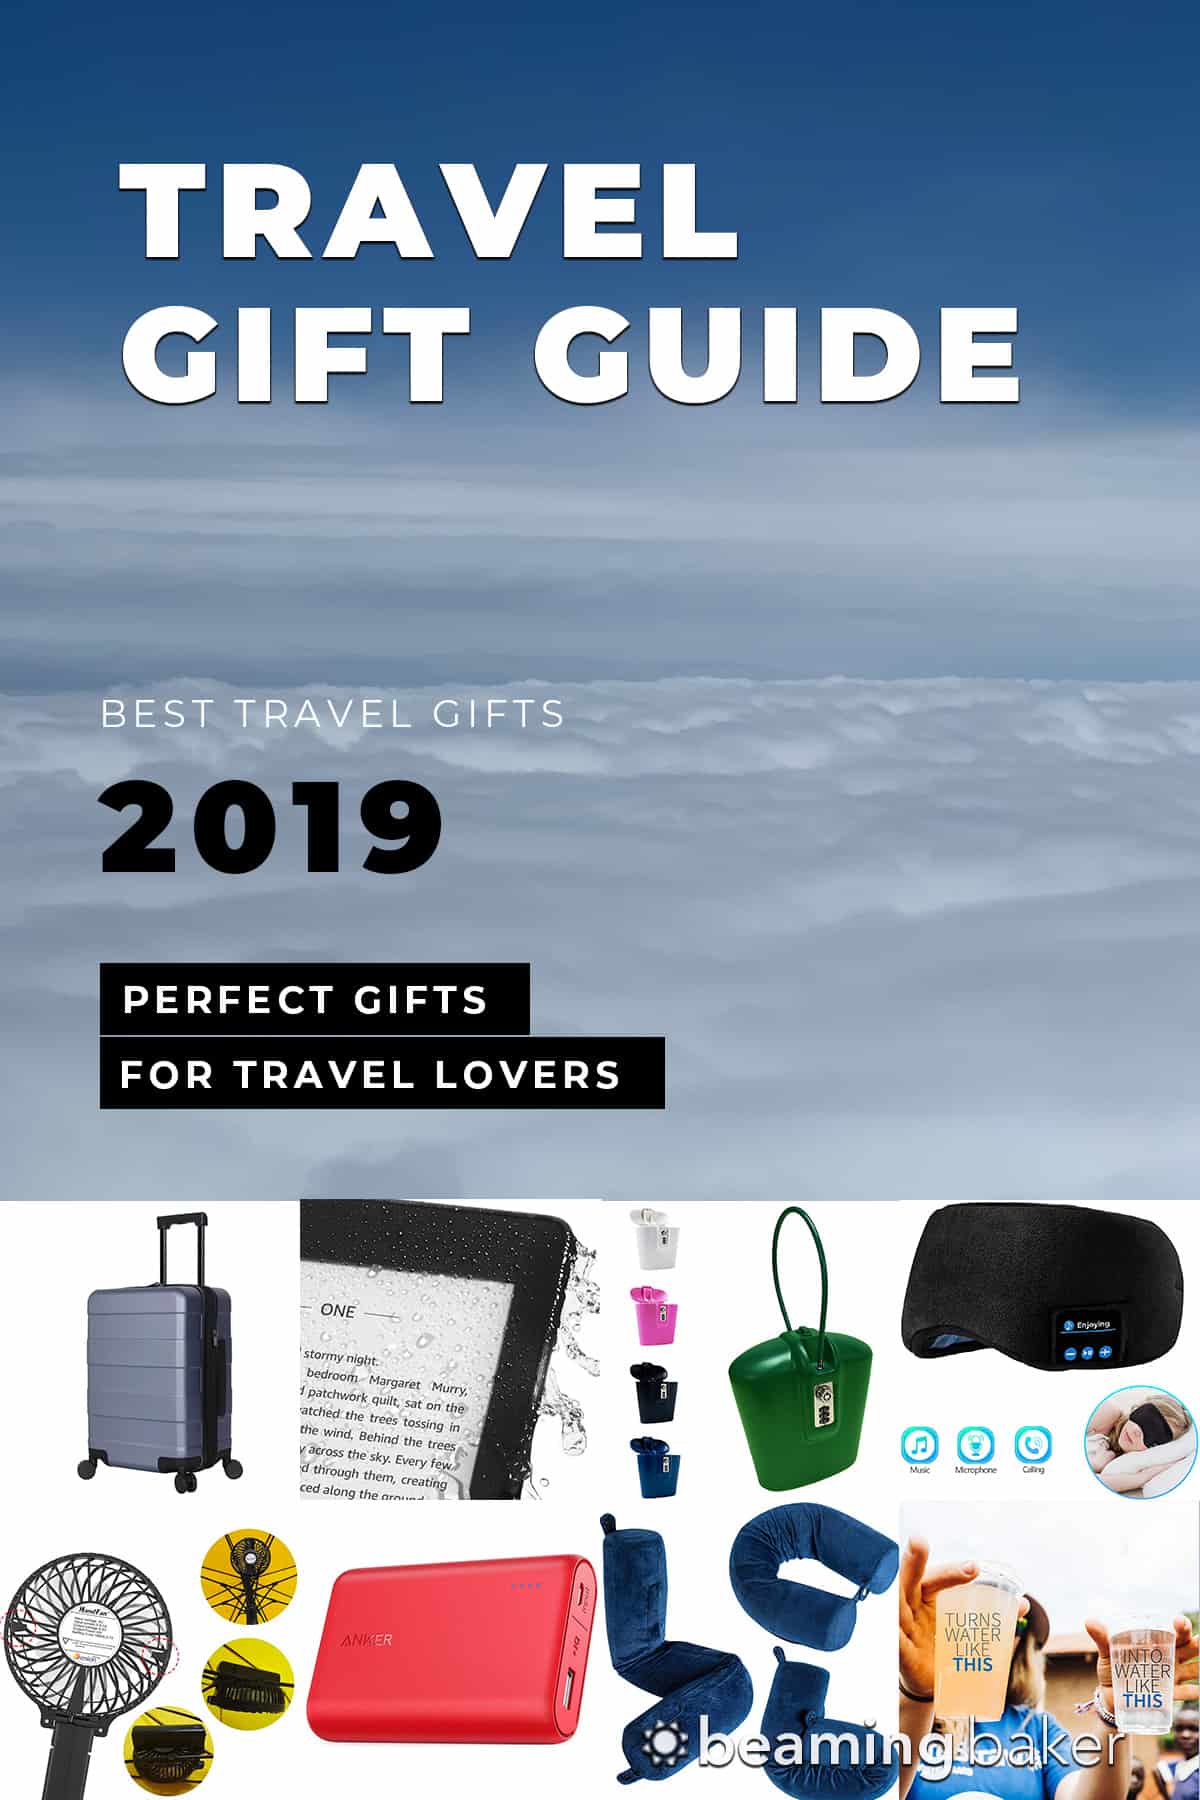 The best gift ideas for people who travel: 2019 Edition. From affordable to luxury, these are the best gifts for travelers! #Travel #TravelTips #GiftIdeas #GiftGuide | Post on BeamingBaker.com